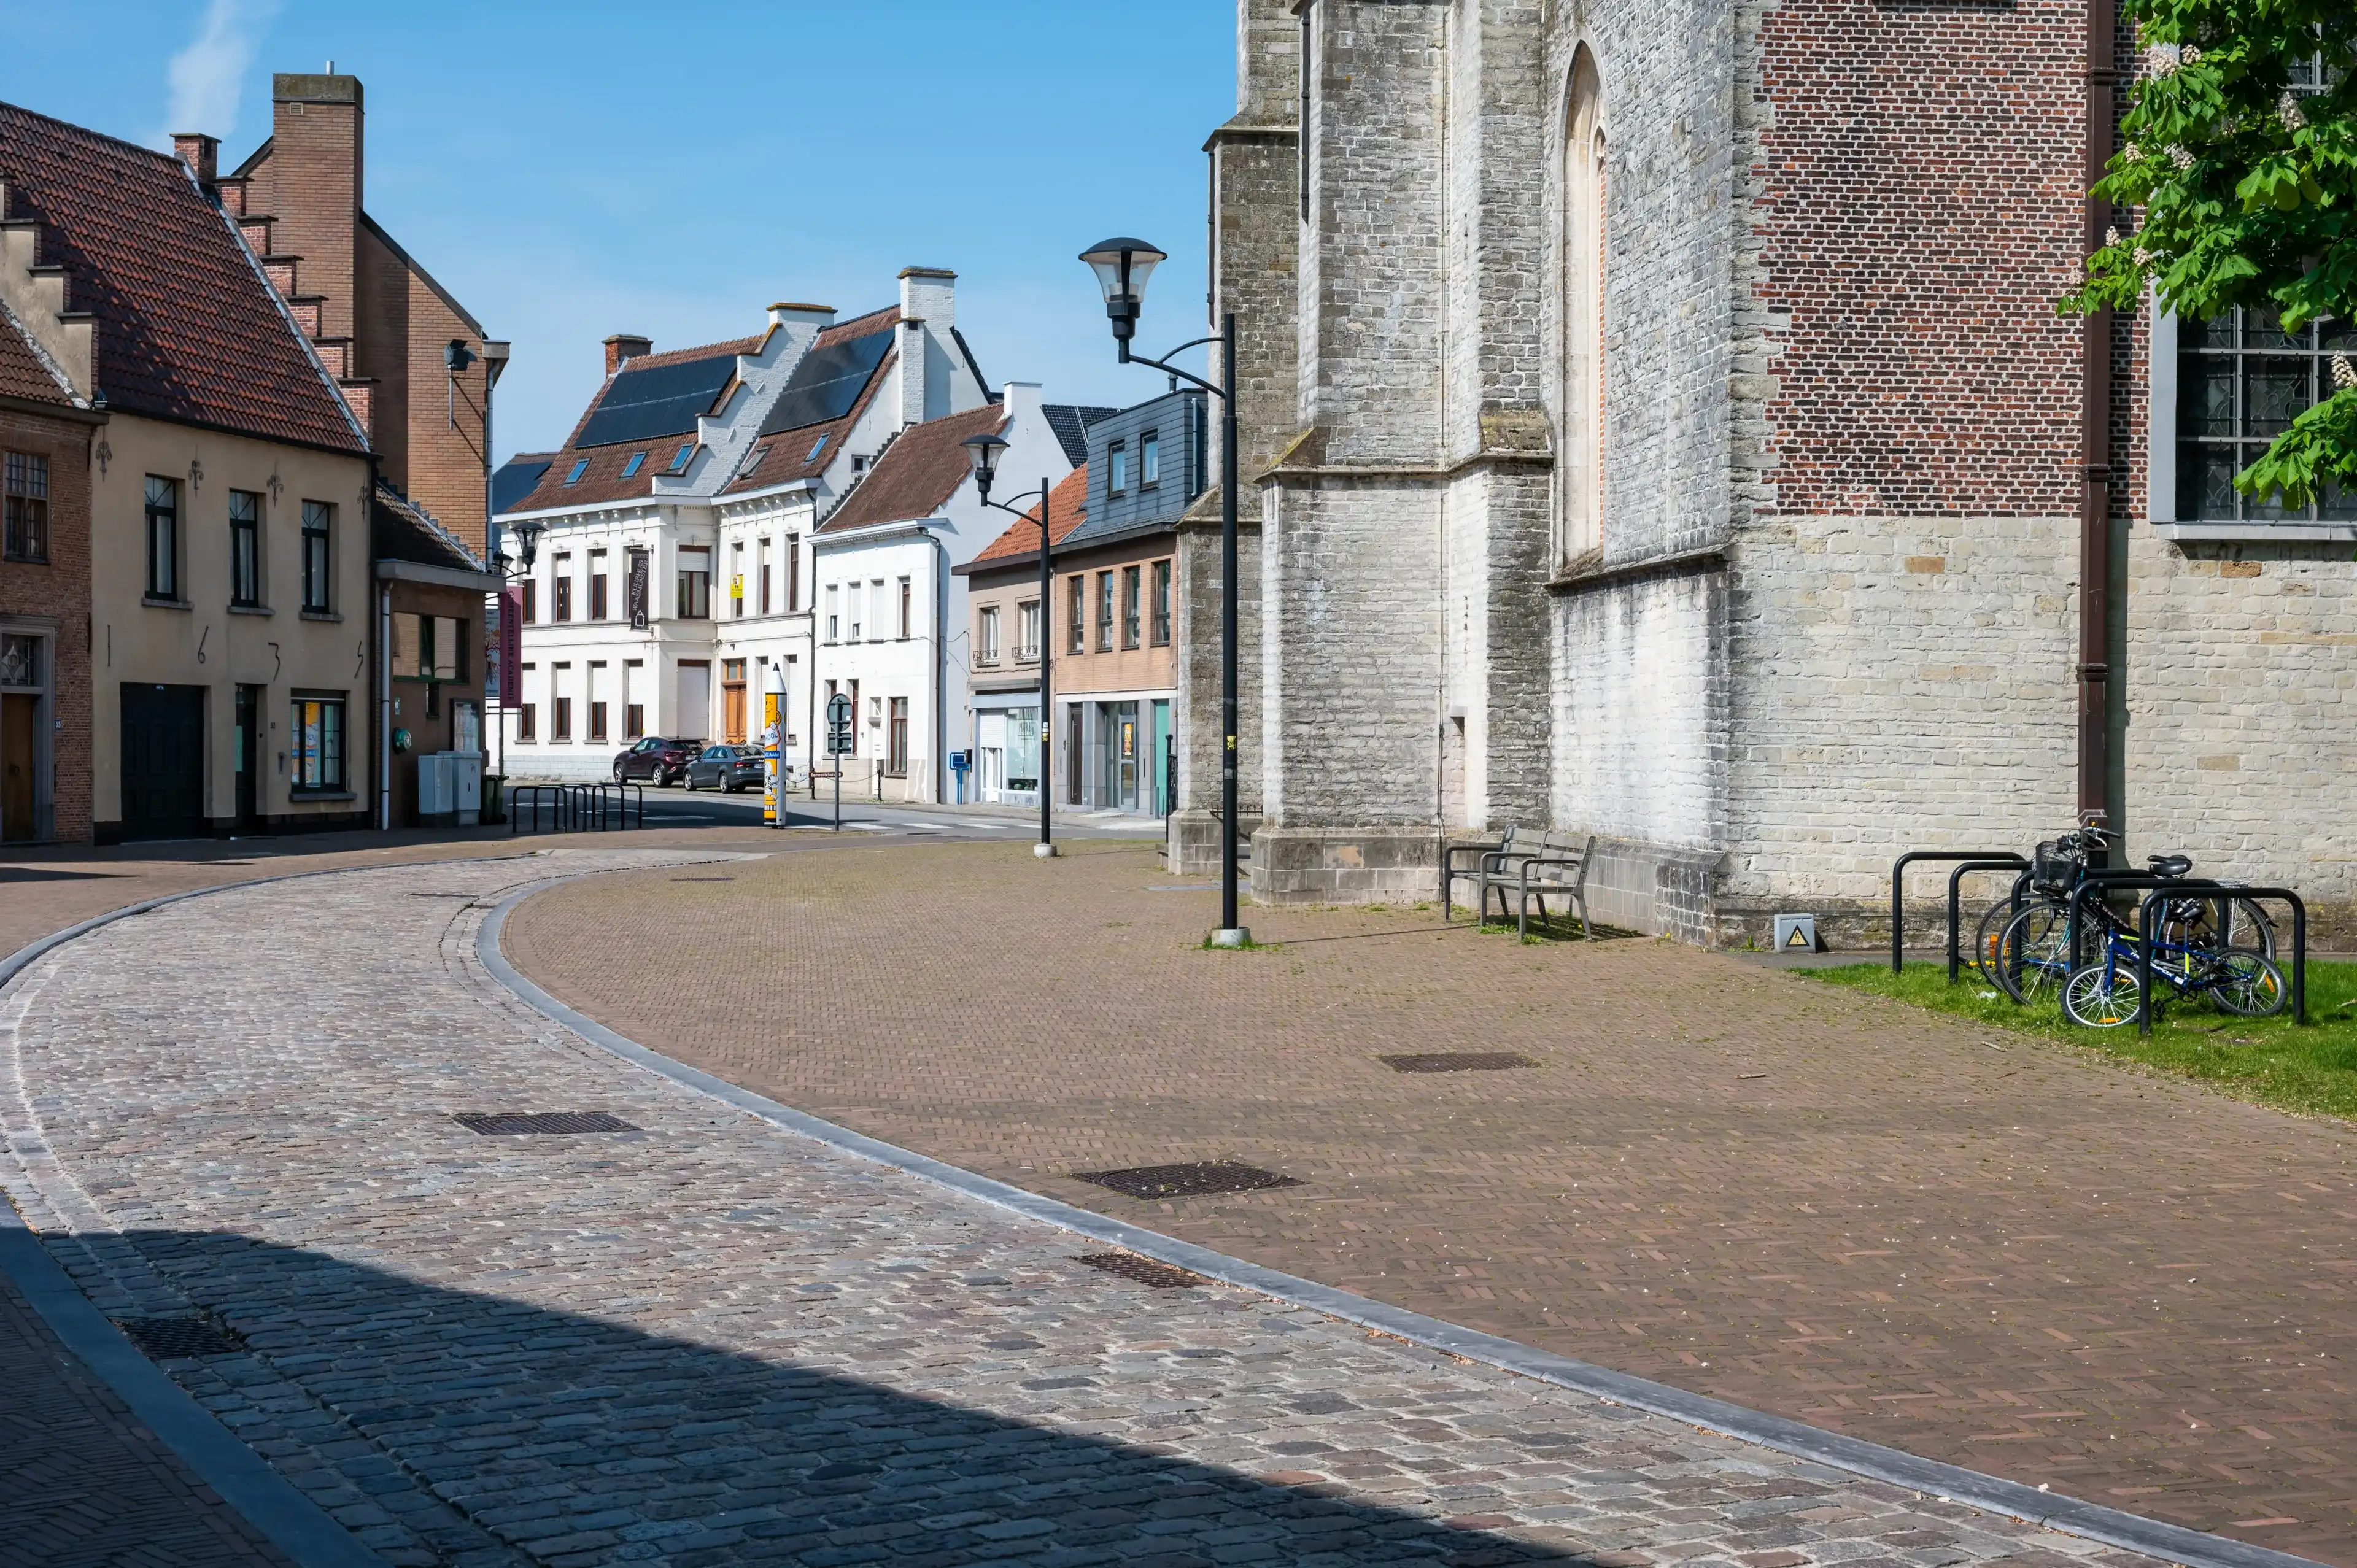 Waasmunster, East Flemish Region, Belgium - May 18, 2023 - Old cobble stone road, church and historical buildings at the old market square in the village center